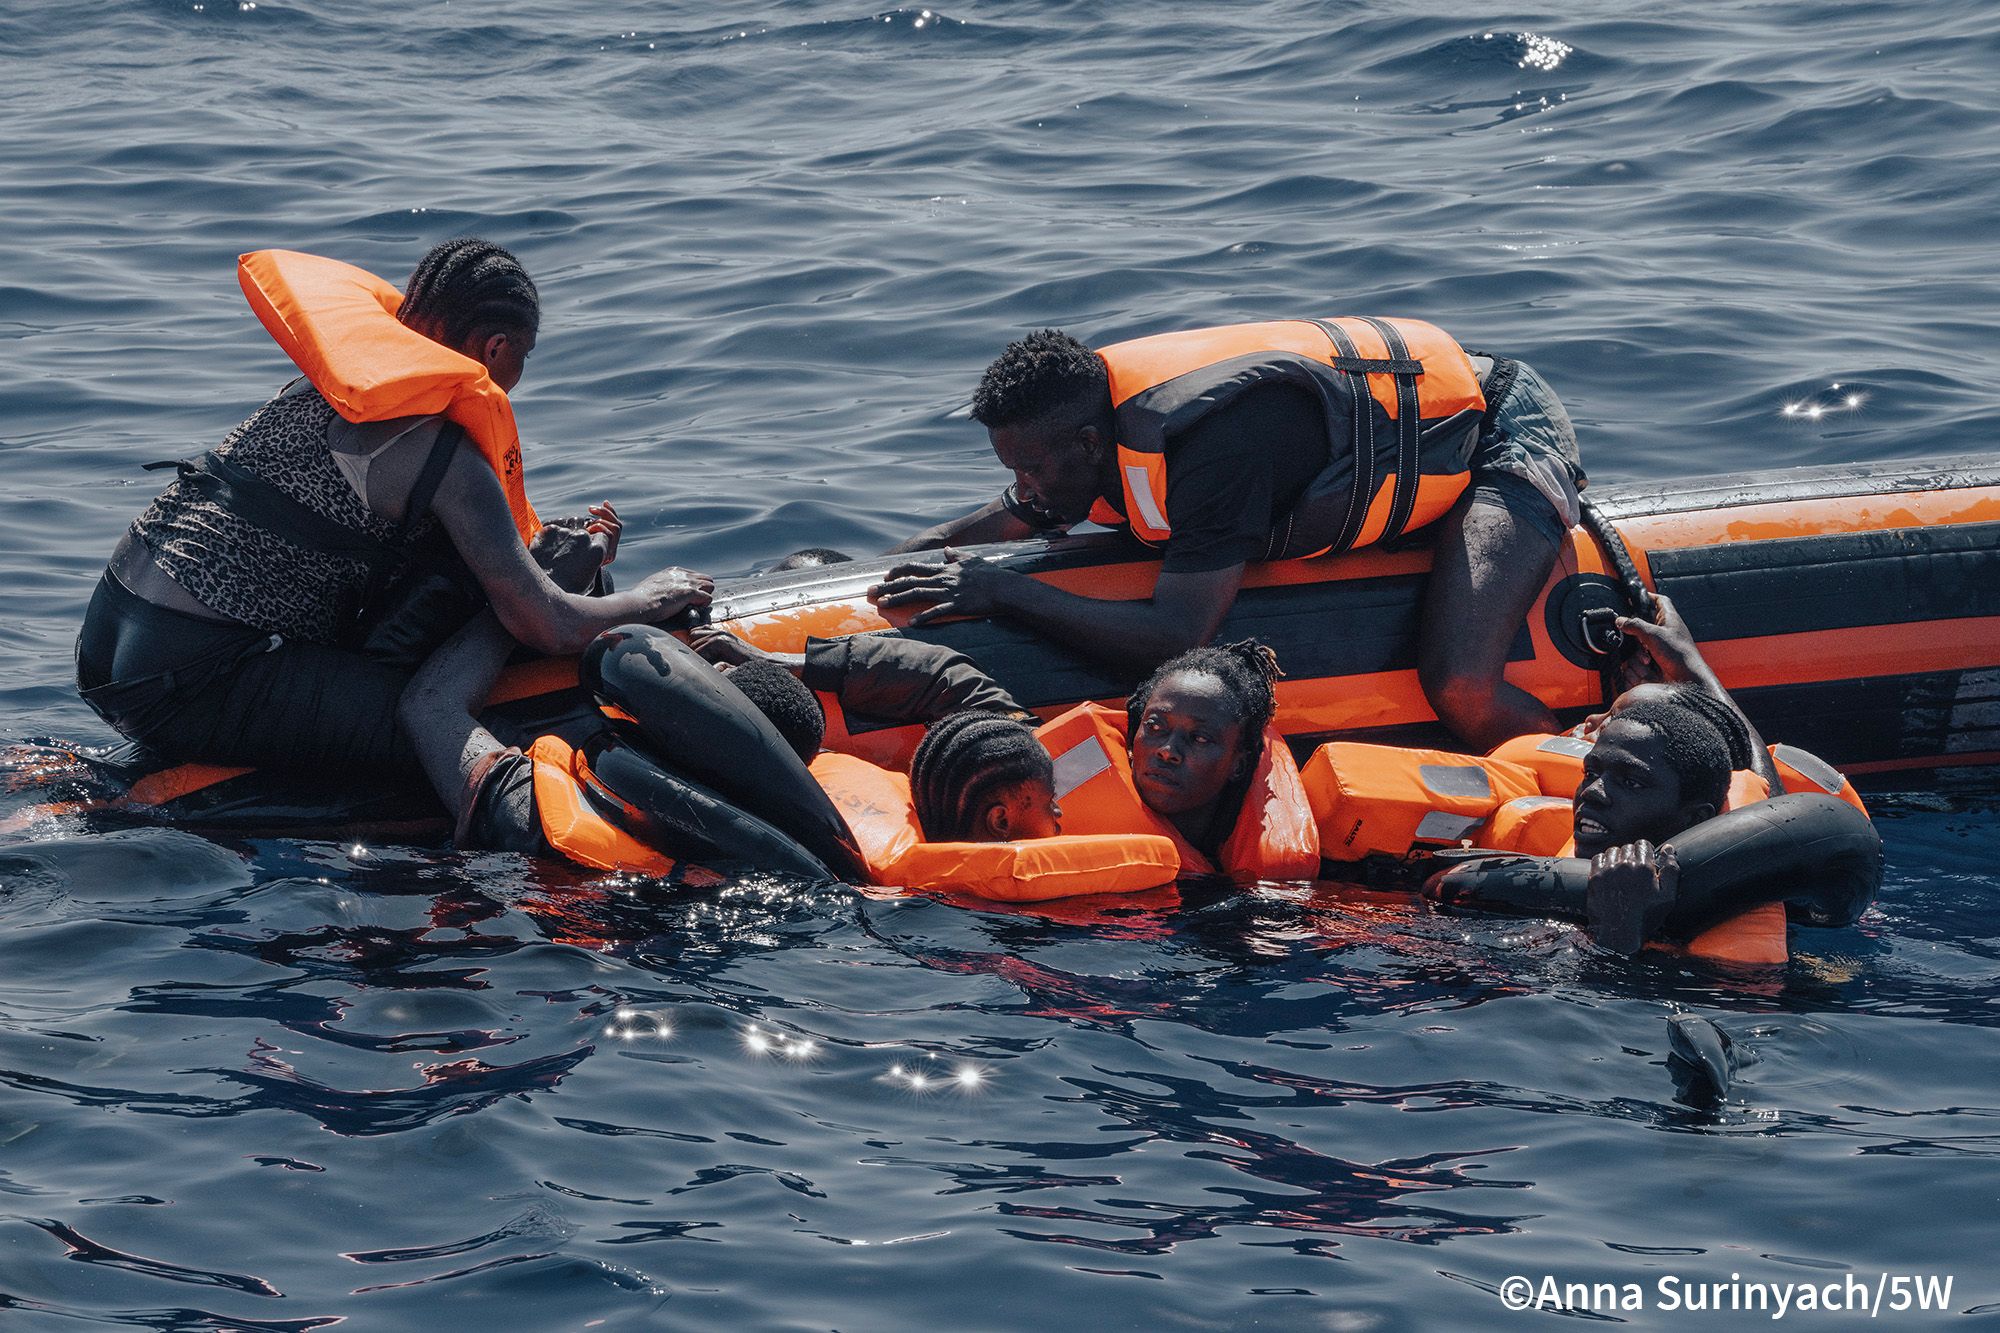 Open Arms assists nearly a thousand people in the midst of a humanitarian emergency in the central Mediterranean